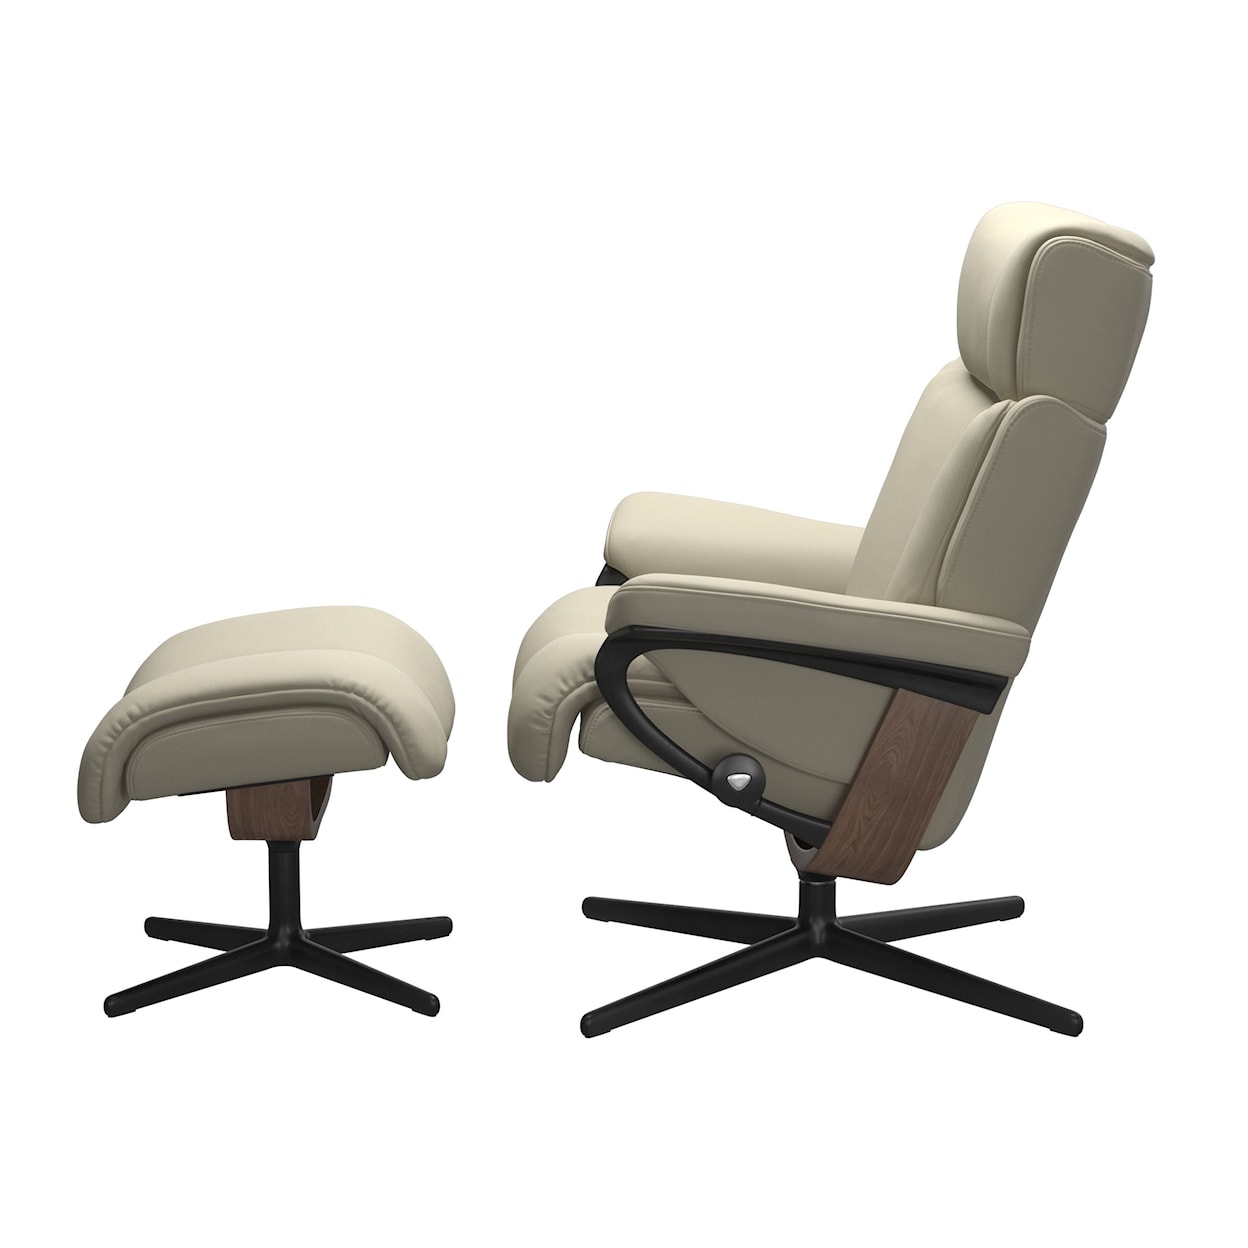 Stressless by Ekornes Magic Magic Small Recliner and Ottoman